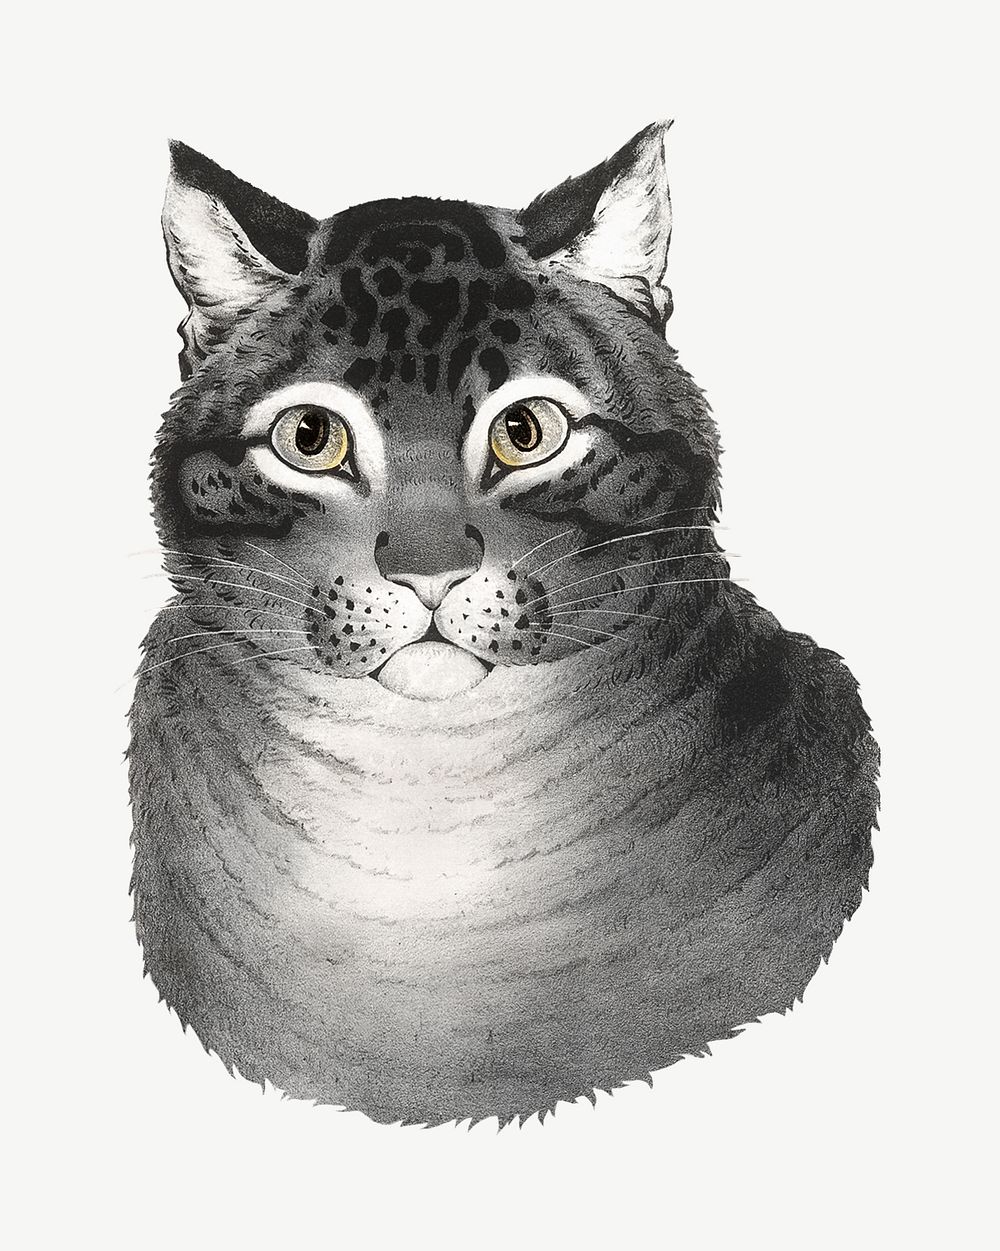 The Favorite Cat, vintage animal illustration by Nathaniel Currier psd. Remixed by rawpixel.